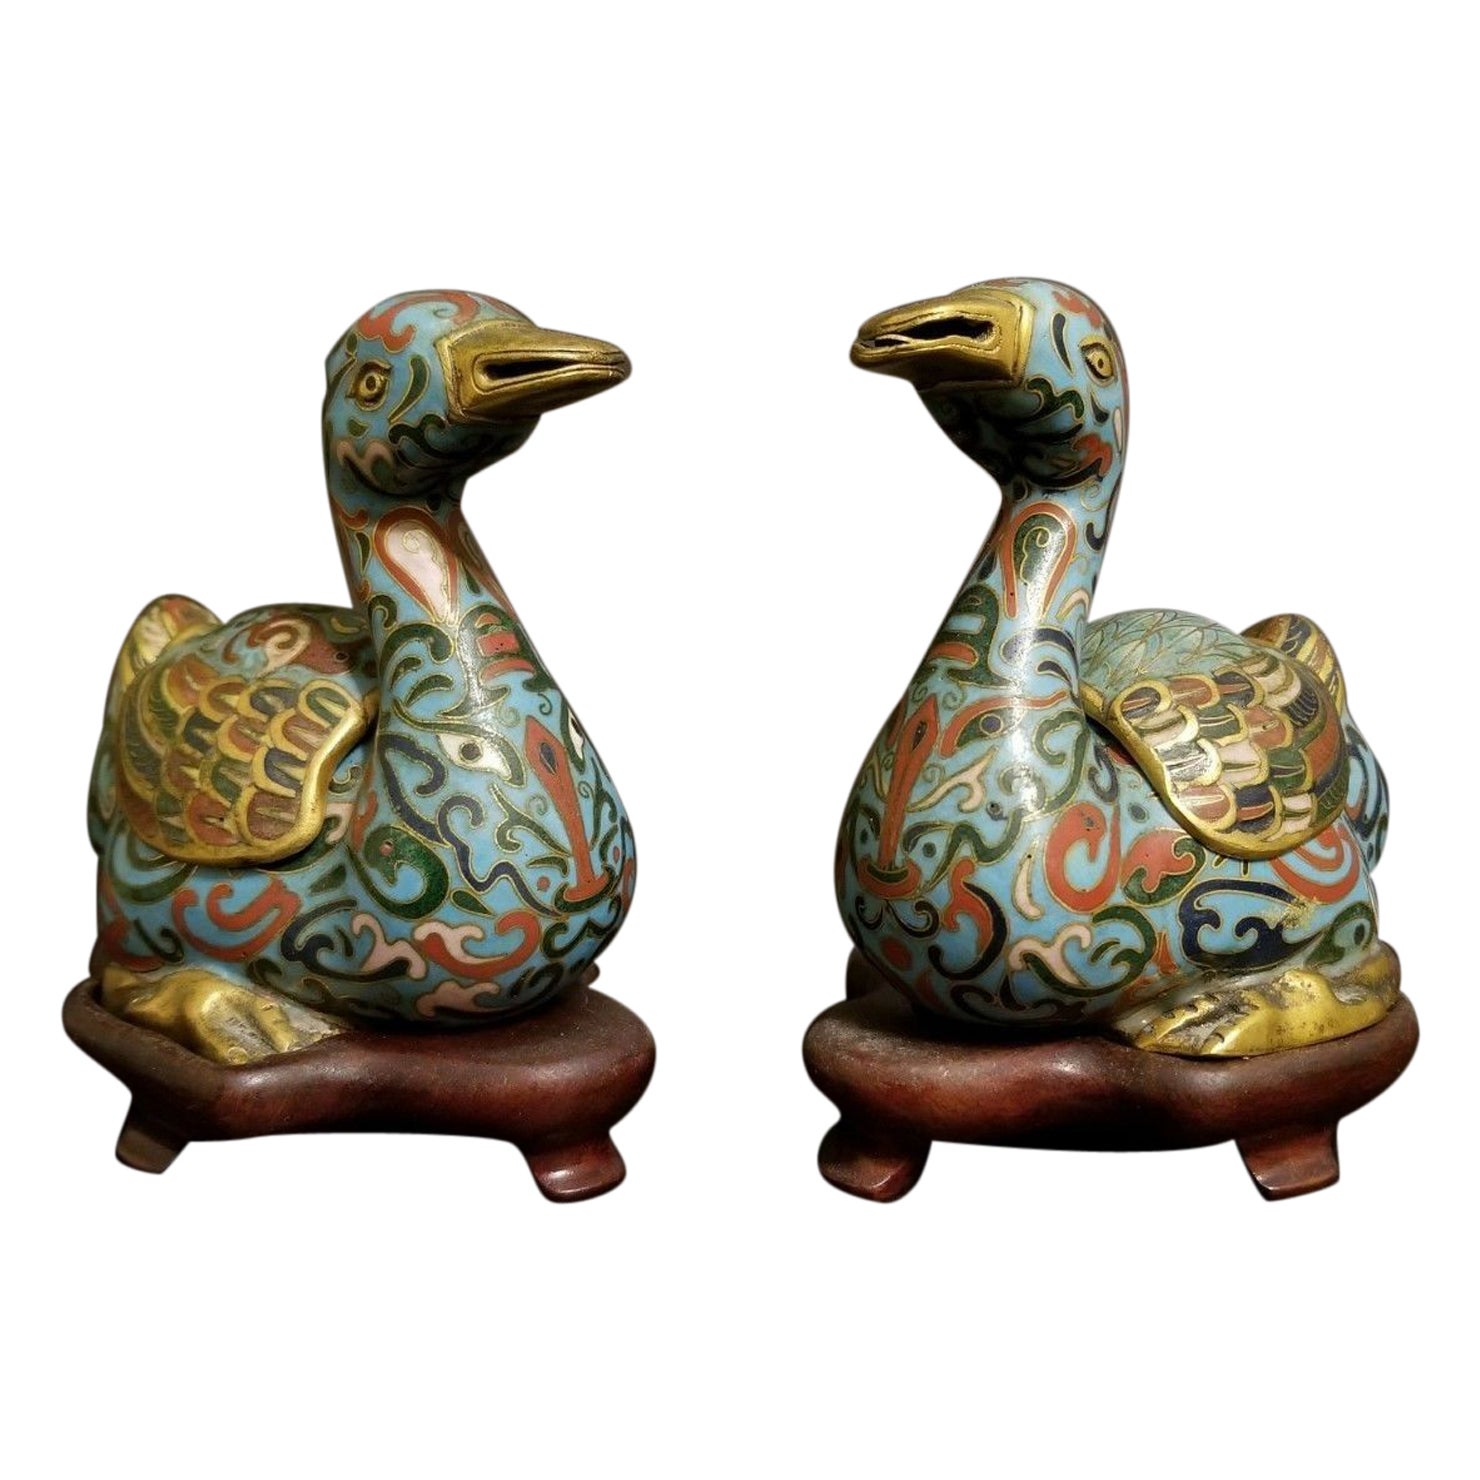 1880's Pair of Chinese Cloisonné Enamel Censer, Ducks on the Fitted Wood Base For Sale